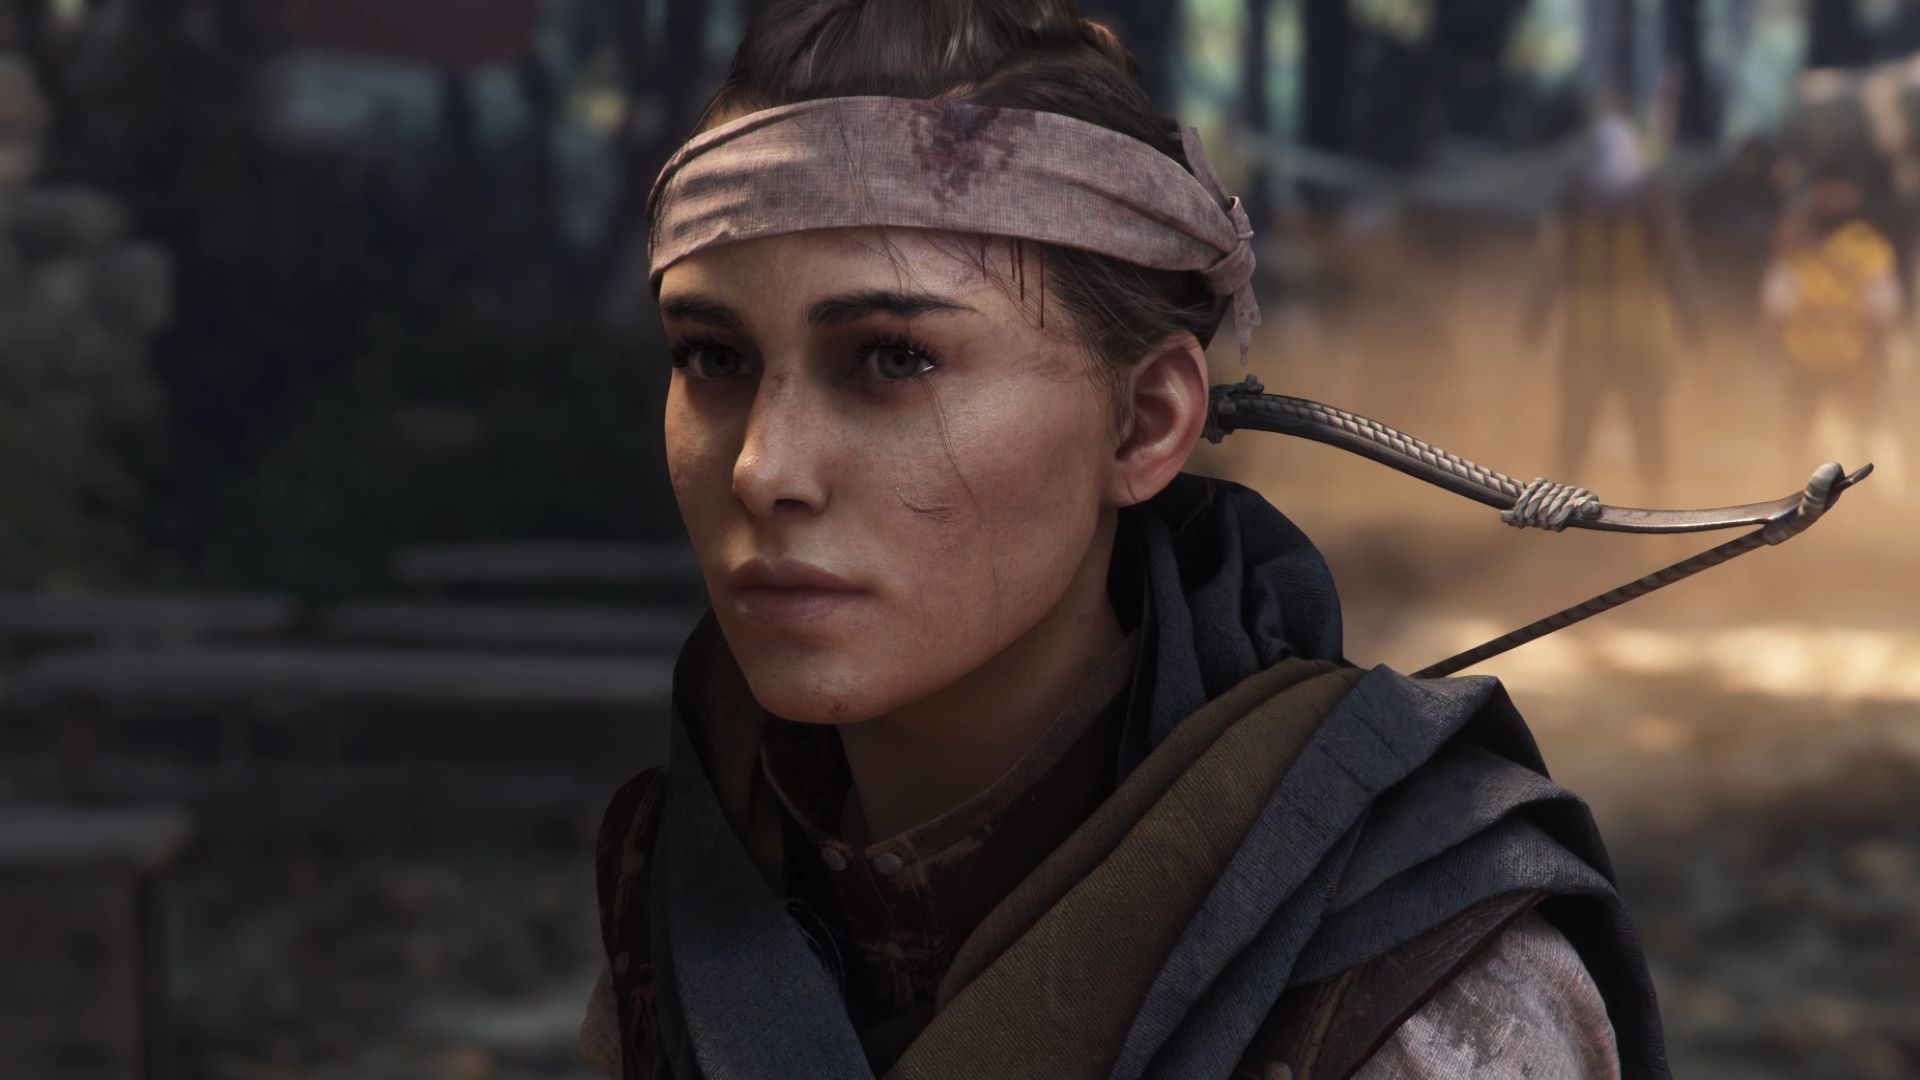 A Plague Tale: Requiem intertwines gameplay with character growth